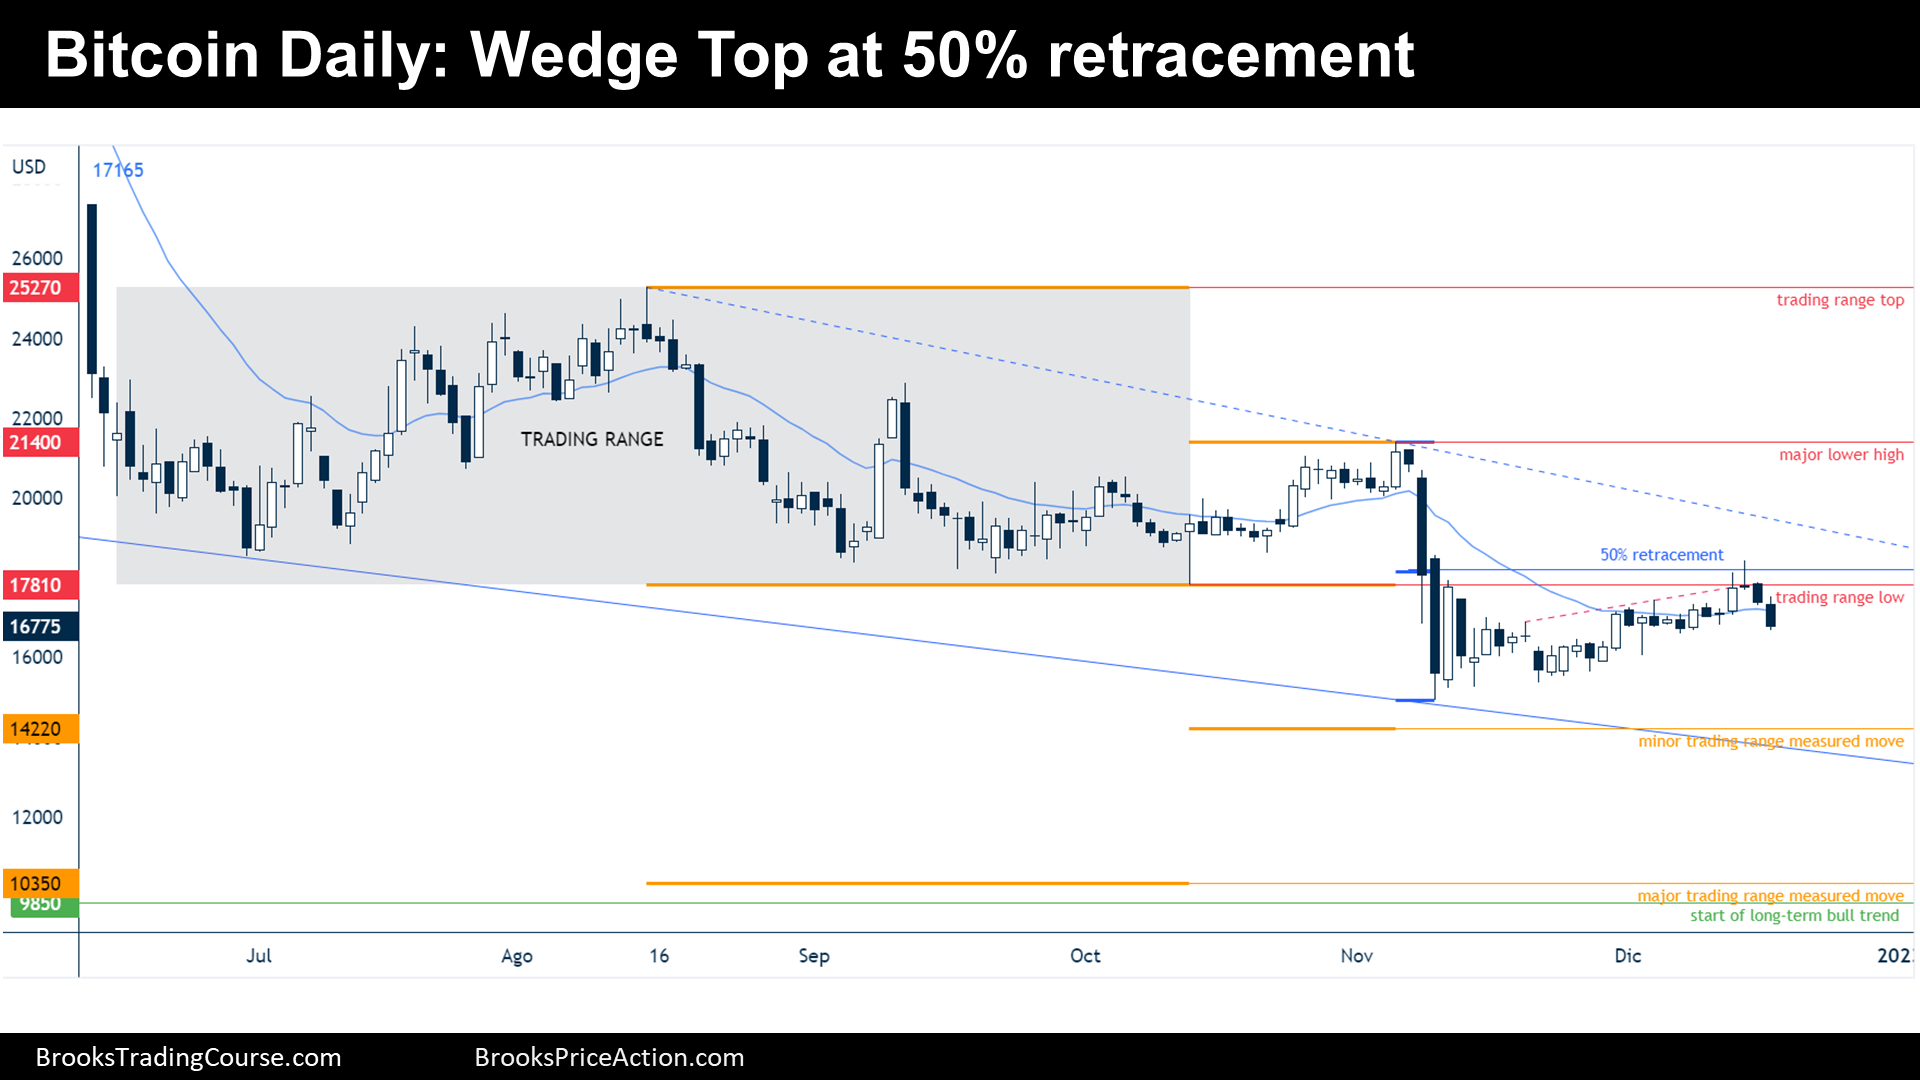 Bitcoin wedge top at a 50% retracement on the daily chart